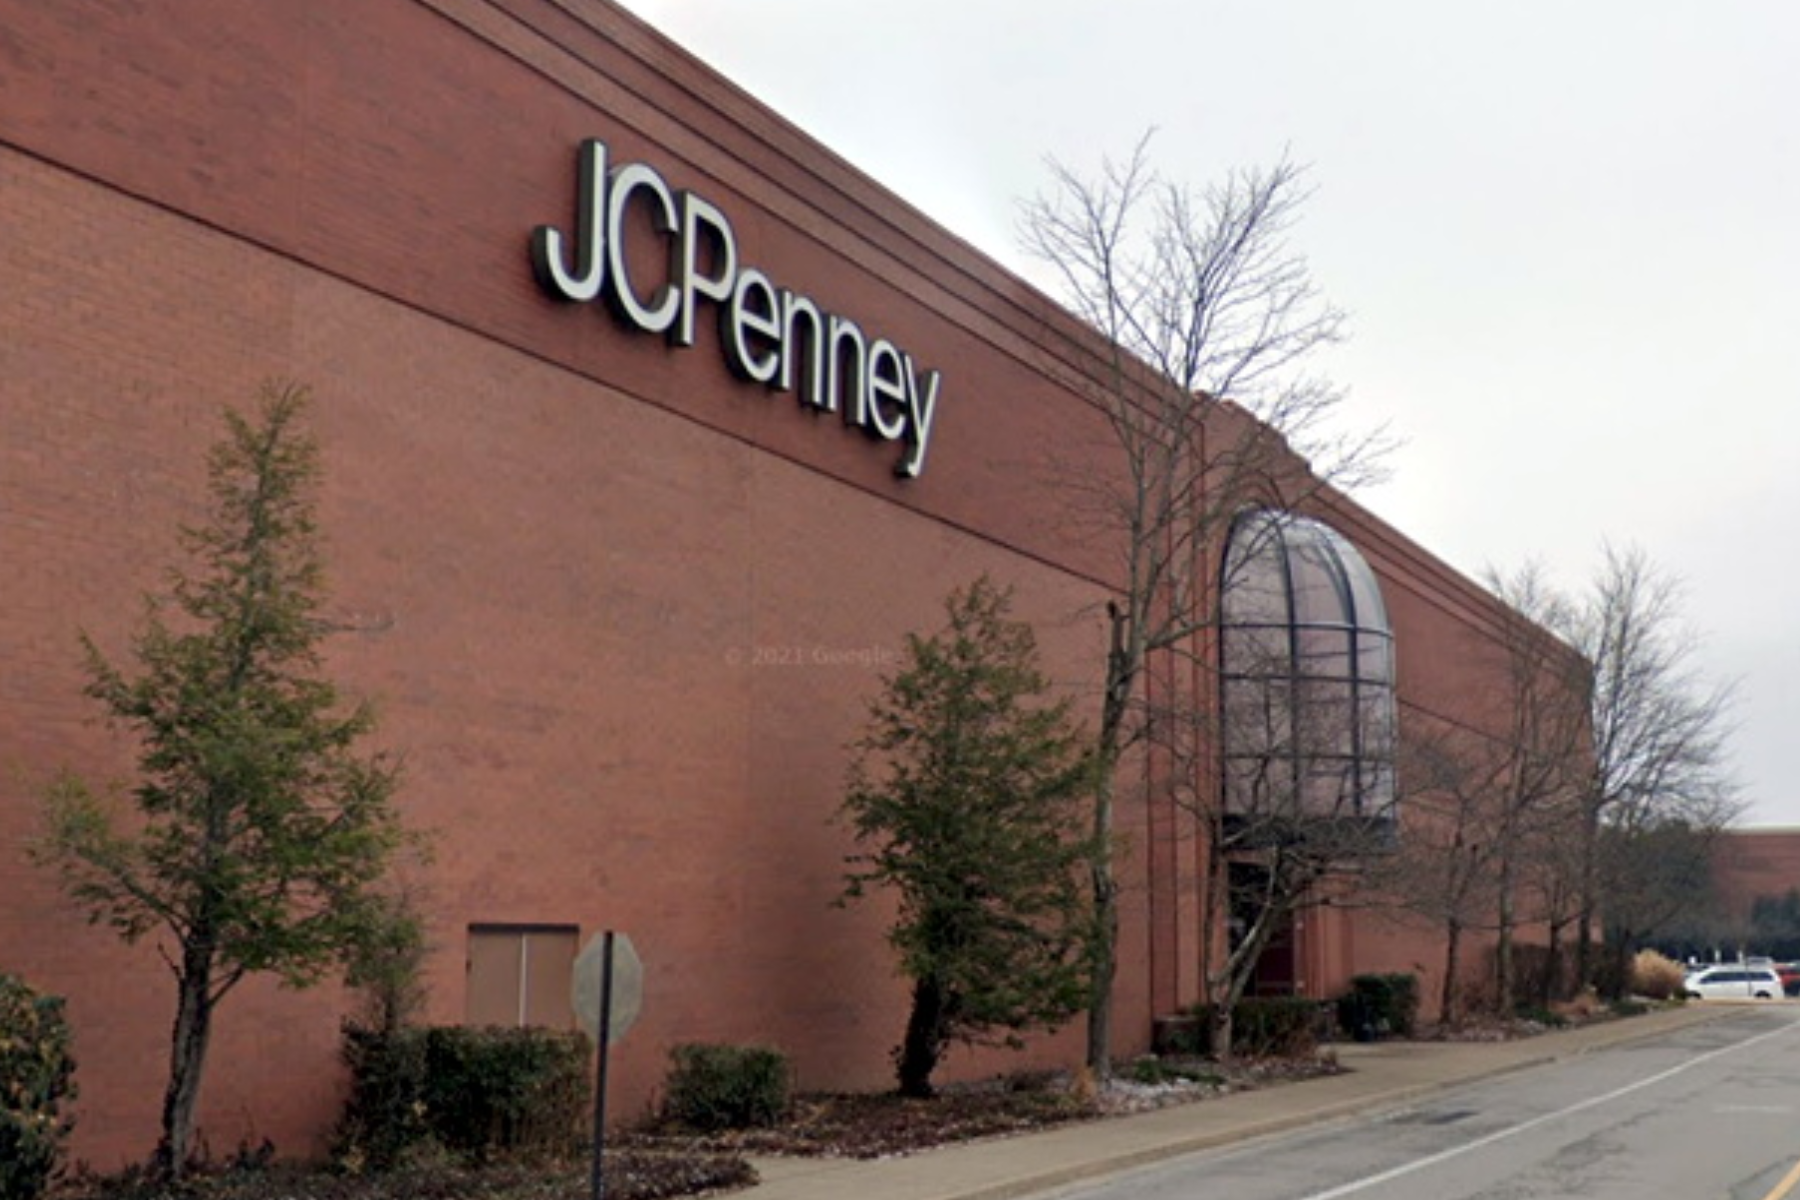 JCPenney Diamond Suspects Linked To $1.5M Series Of Raids